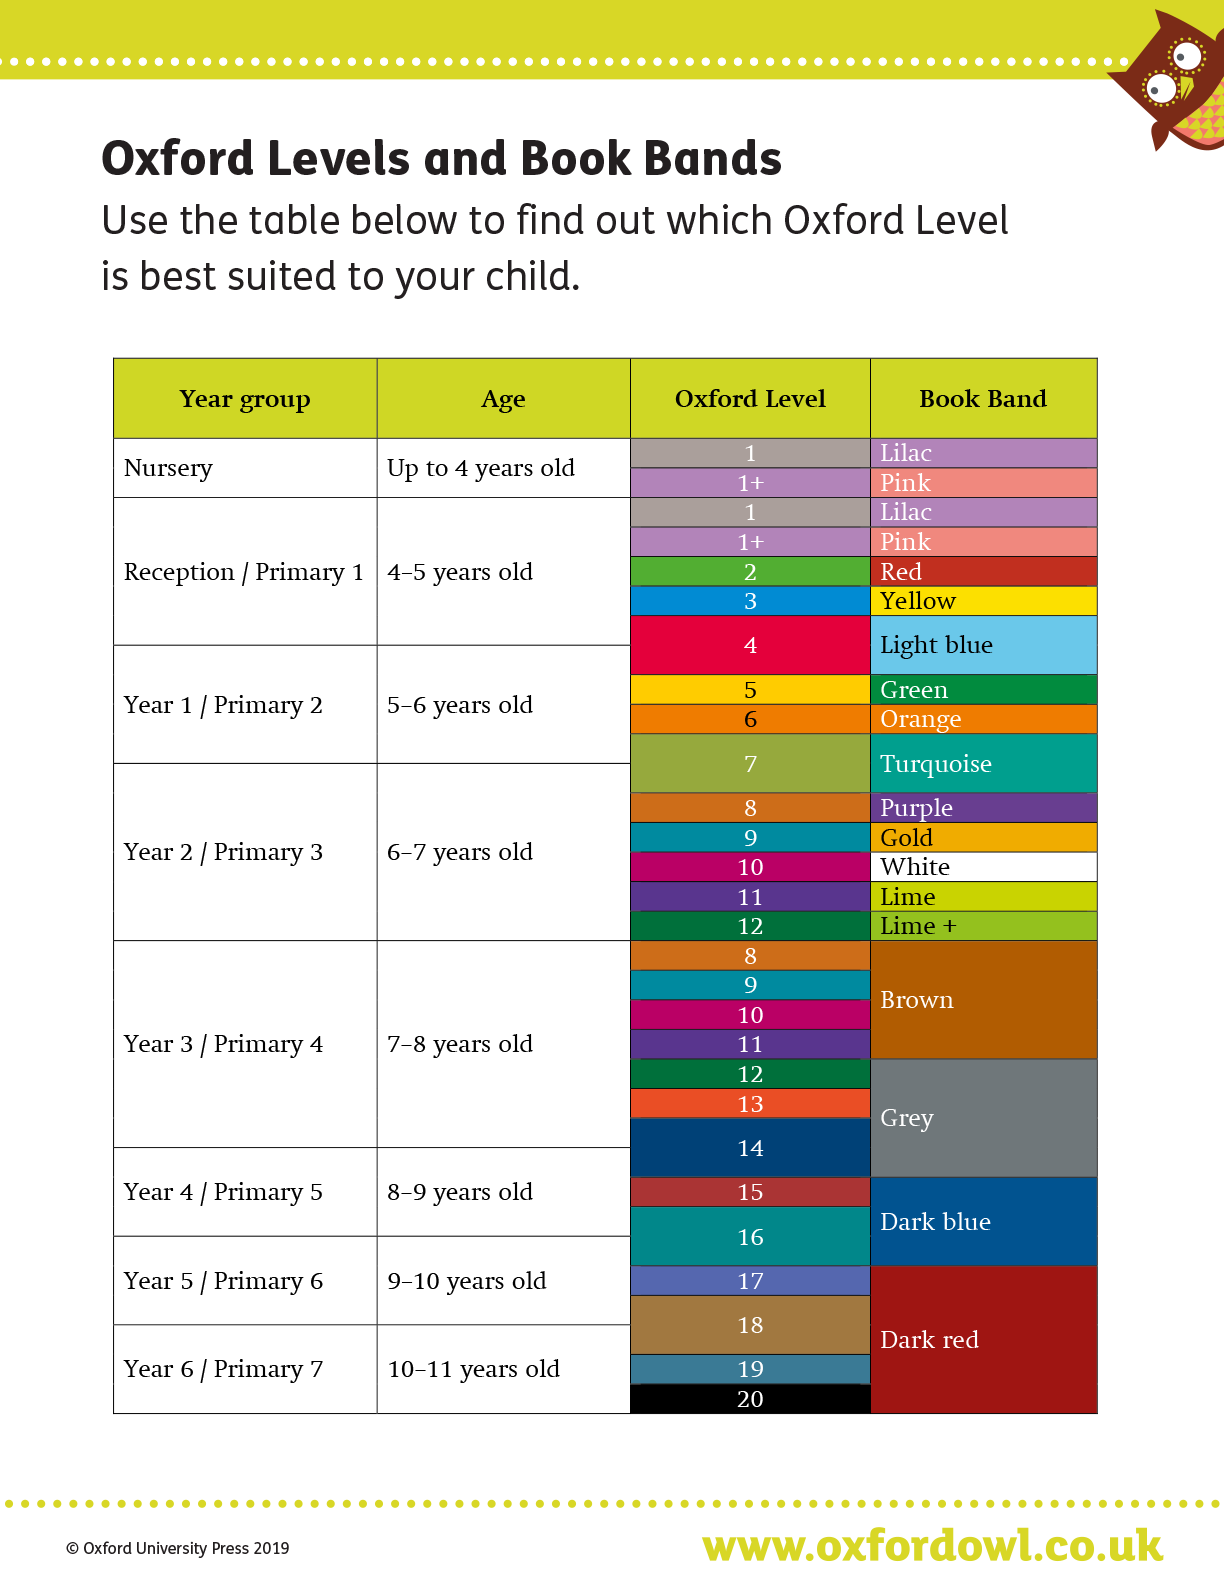 Oxford Reading Tree & Levels: parent guide - Oxford Owl for Home